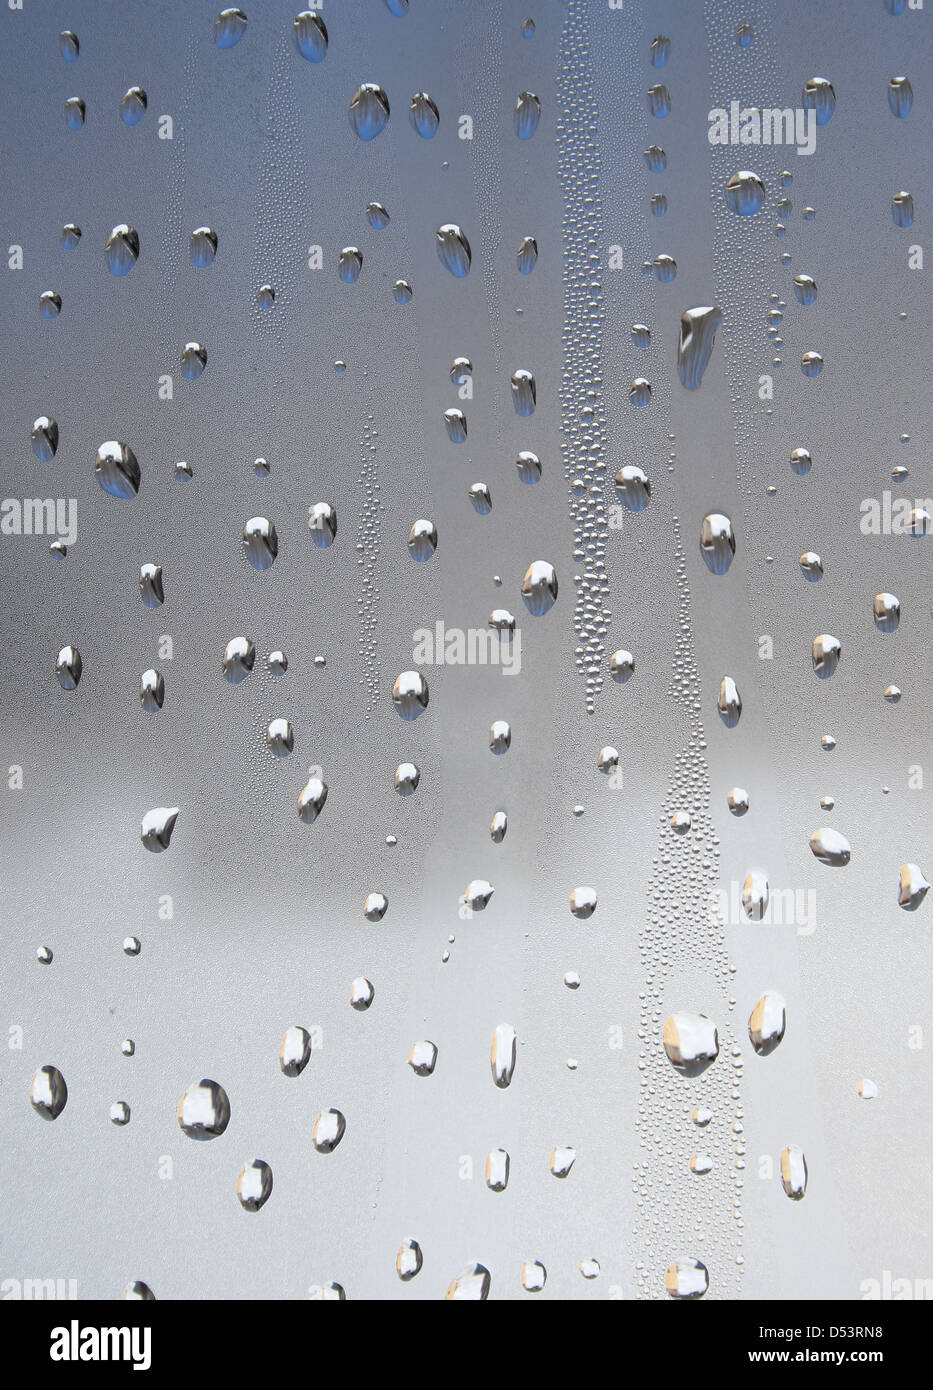 Water drops of metallic color on glass. Stock Photo